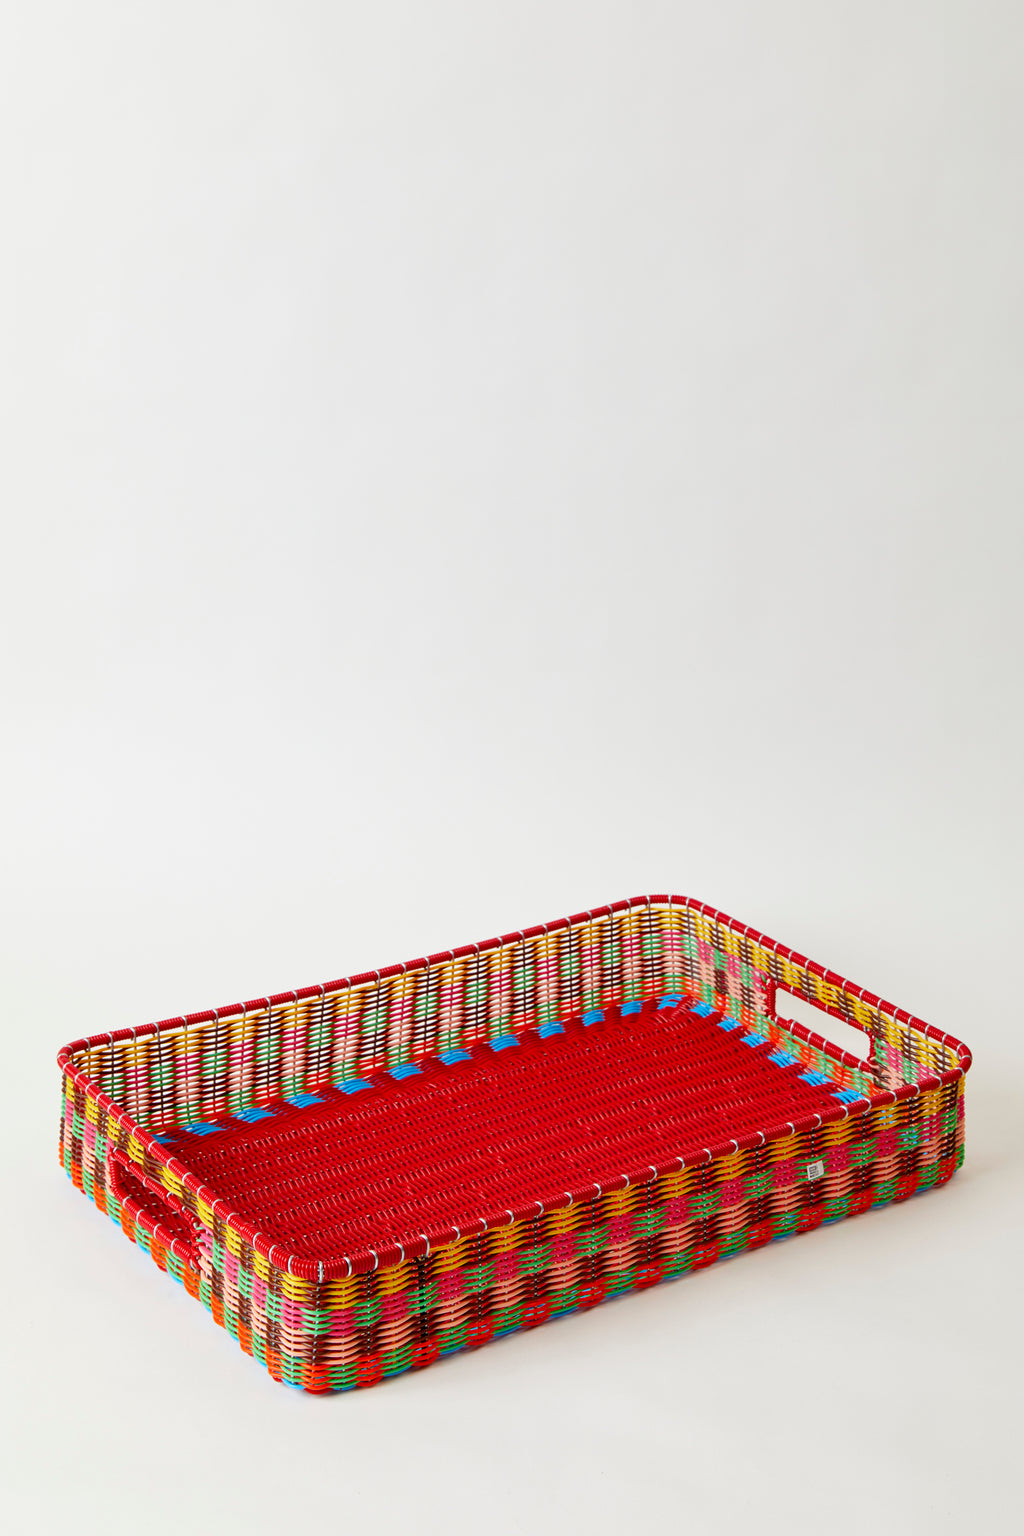 WOVEN SERVING TRAY – Houses & Parties